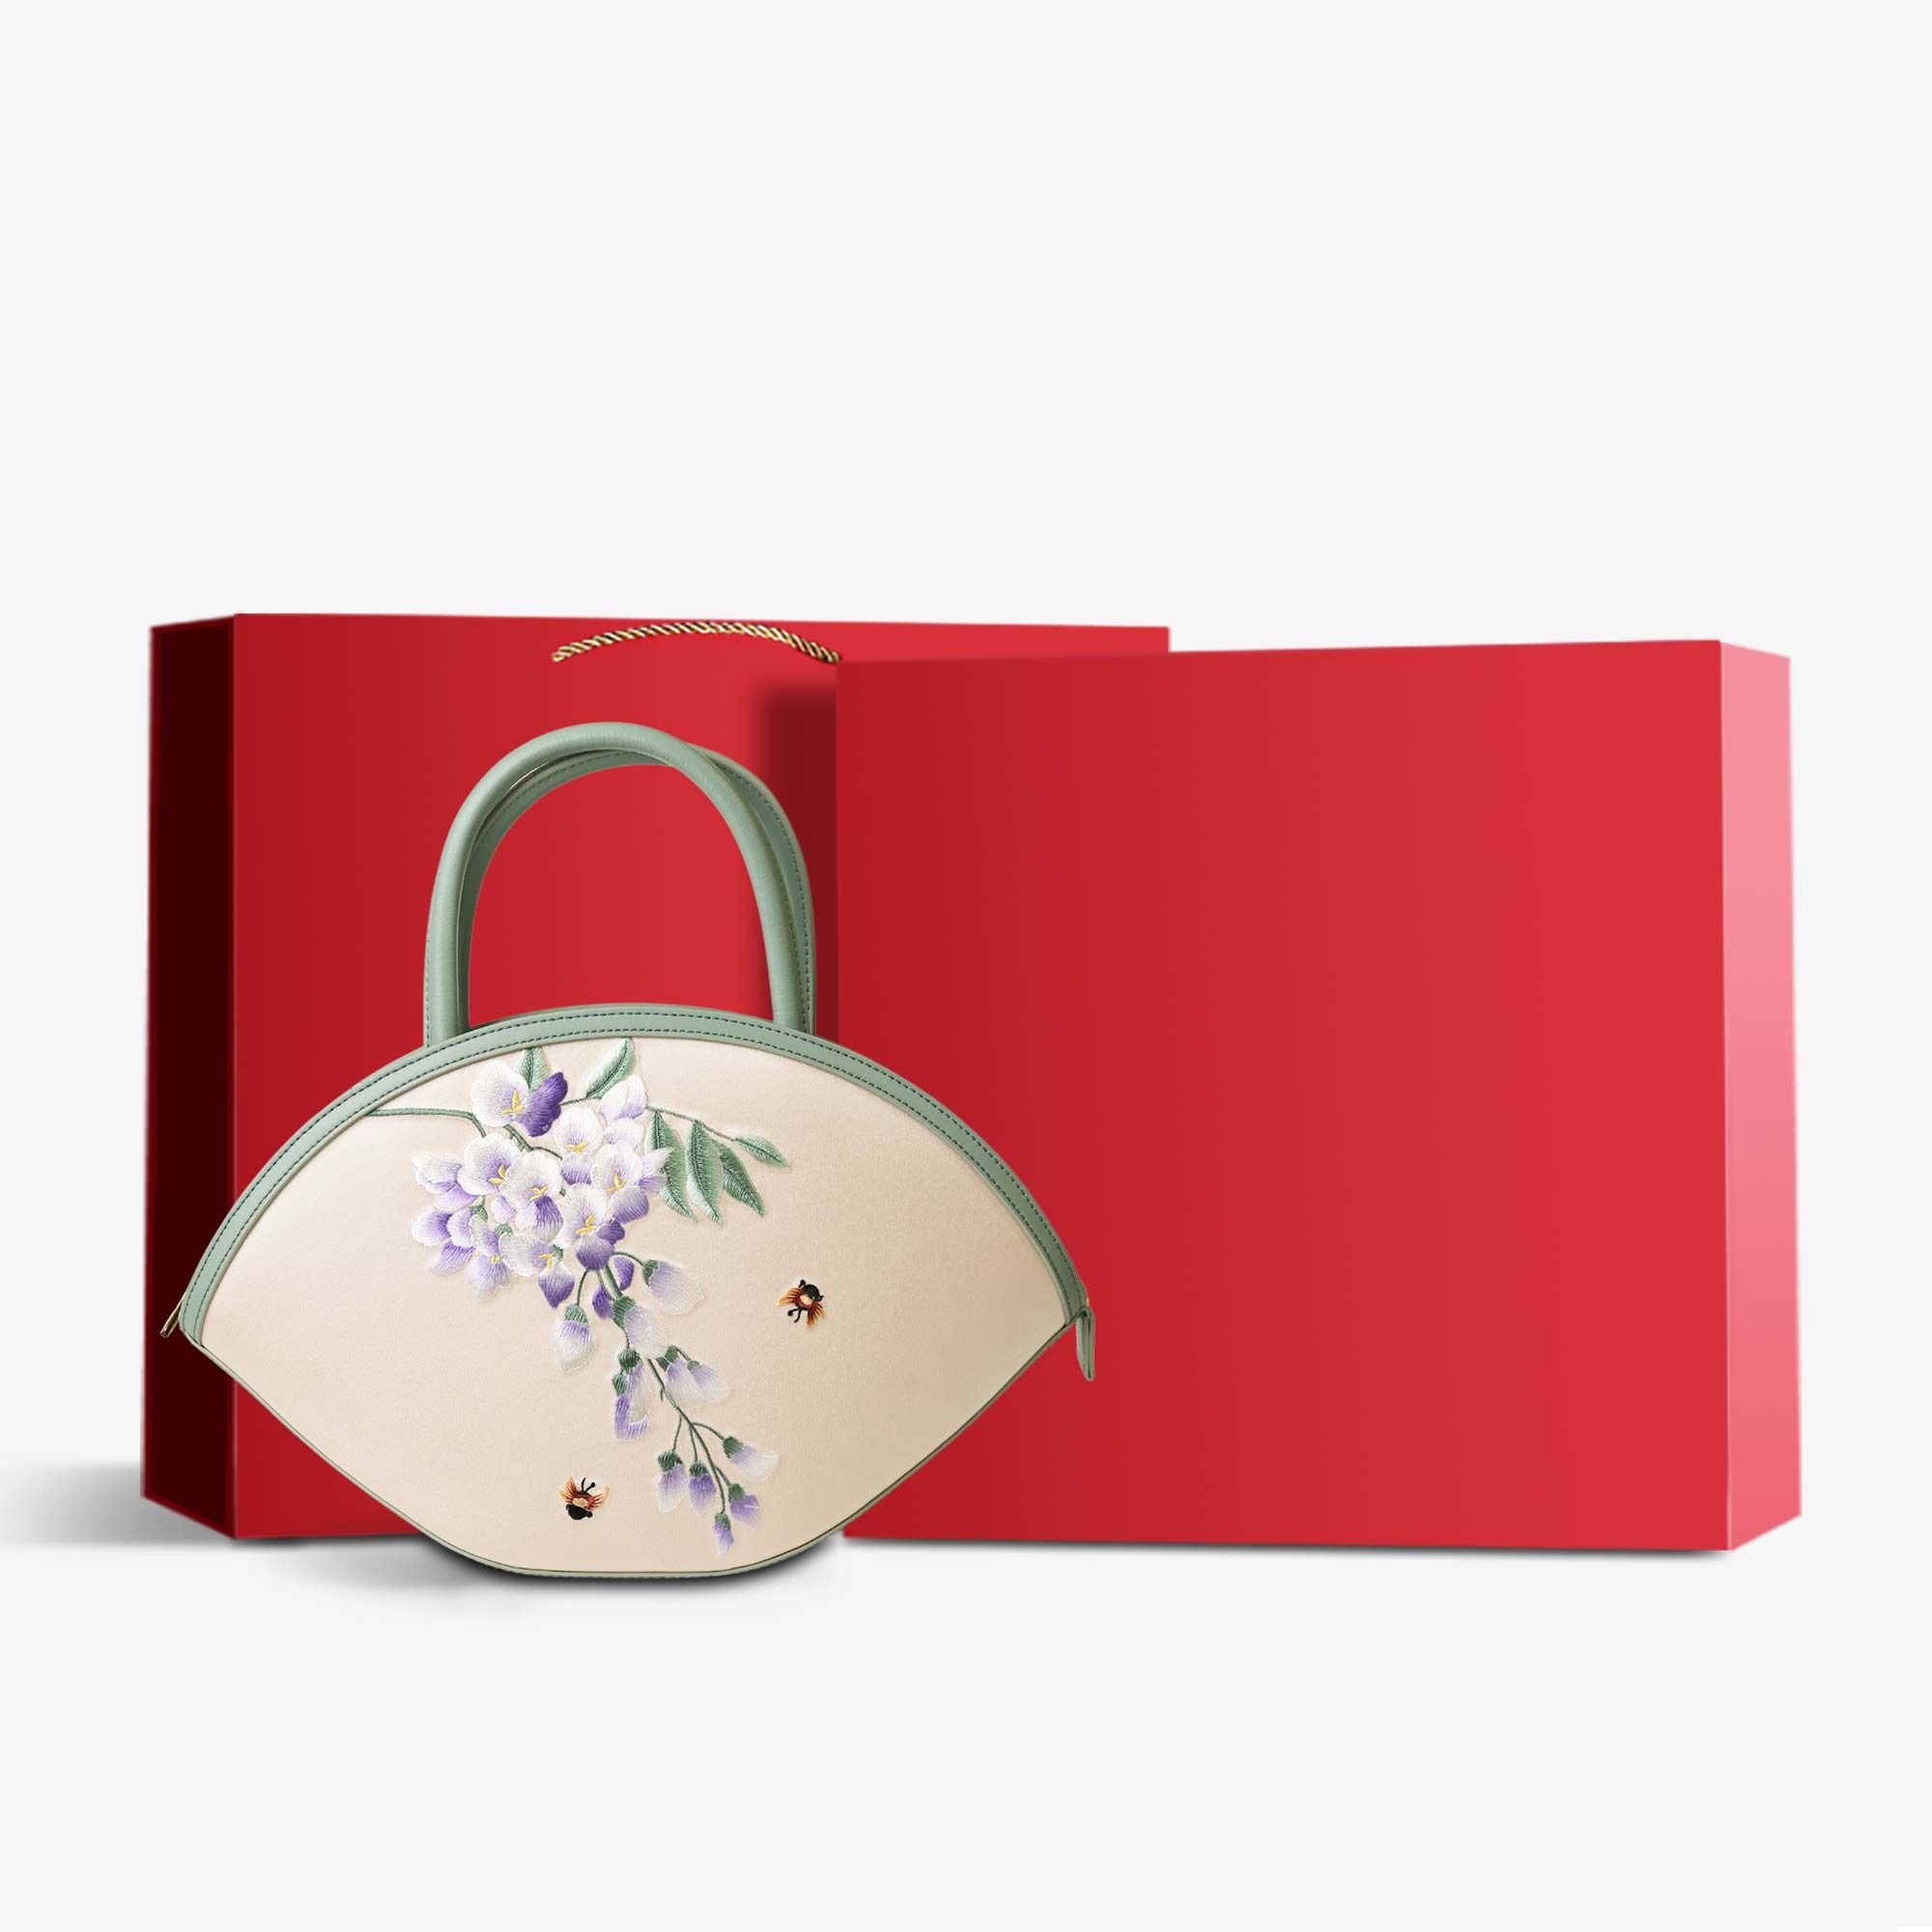 Embroidery Silk Wisteria Floral Handbag-Tote Bag-SinoCultural-Green-Bag with Gift Box-BXL06WCS204A01-g-SinoCultural